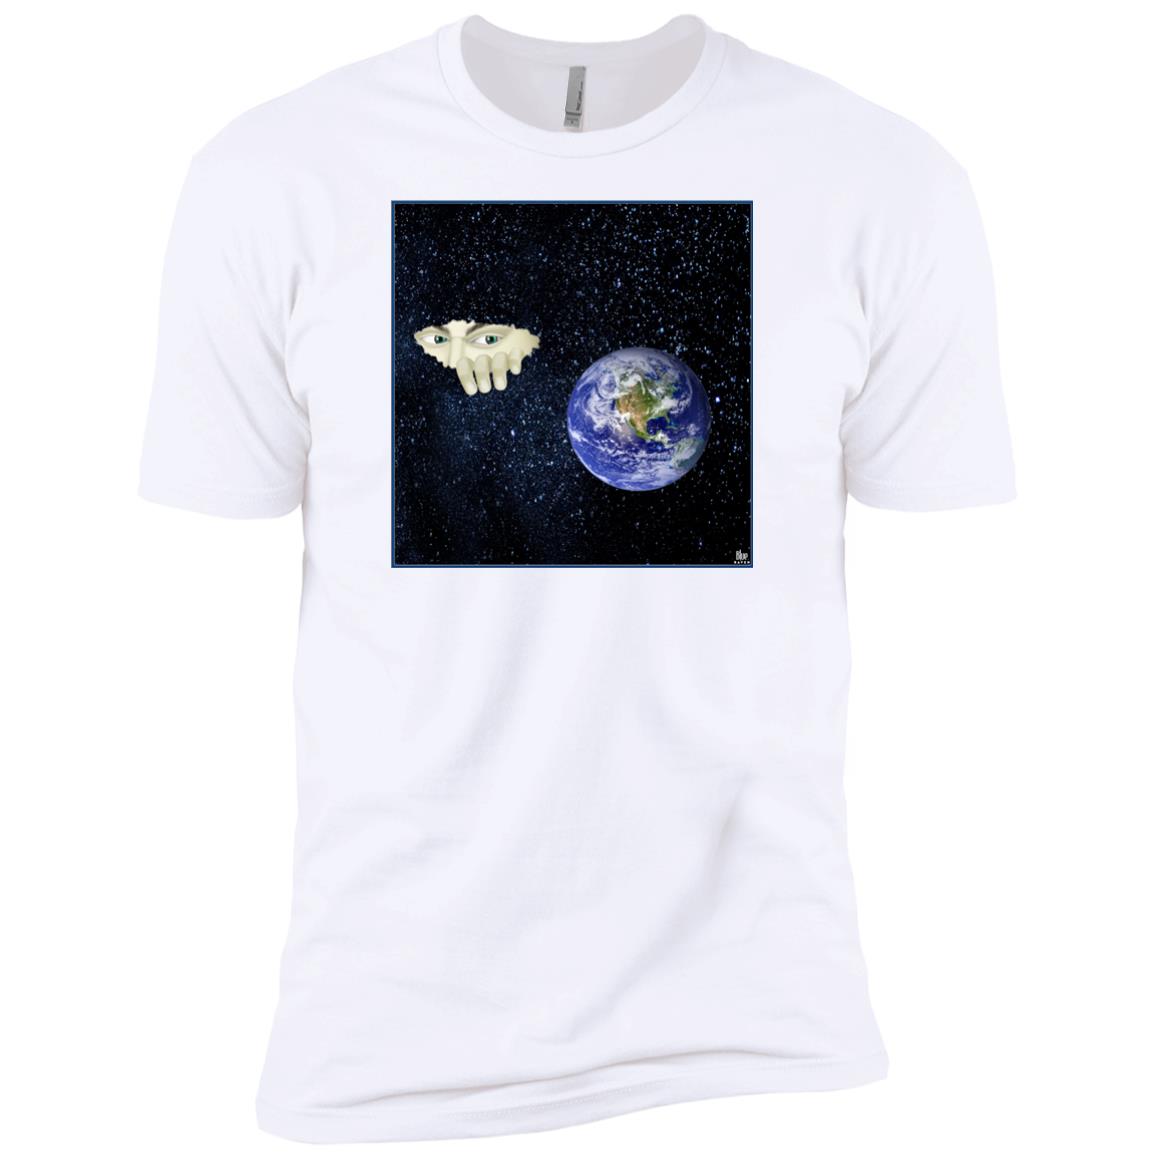 SOMEWHERE OUT THERE - Men's Premium Fitted T-Shirt